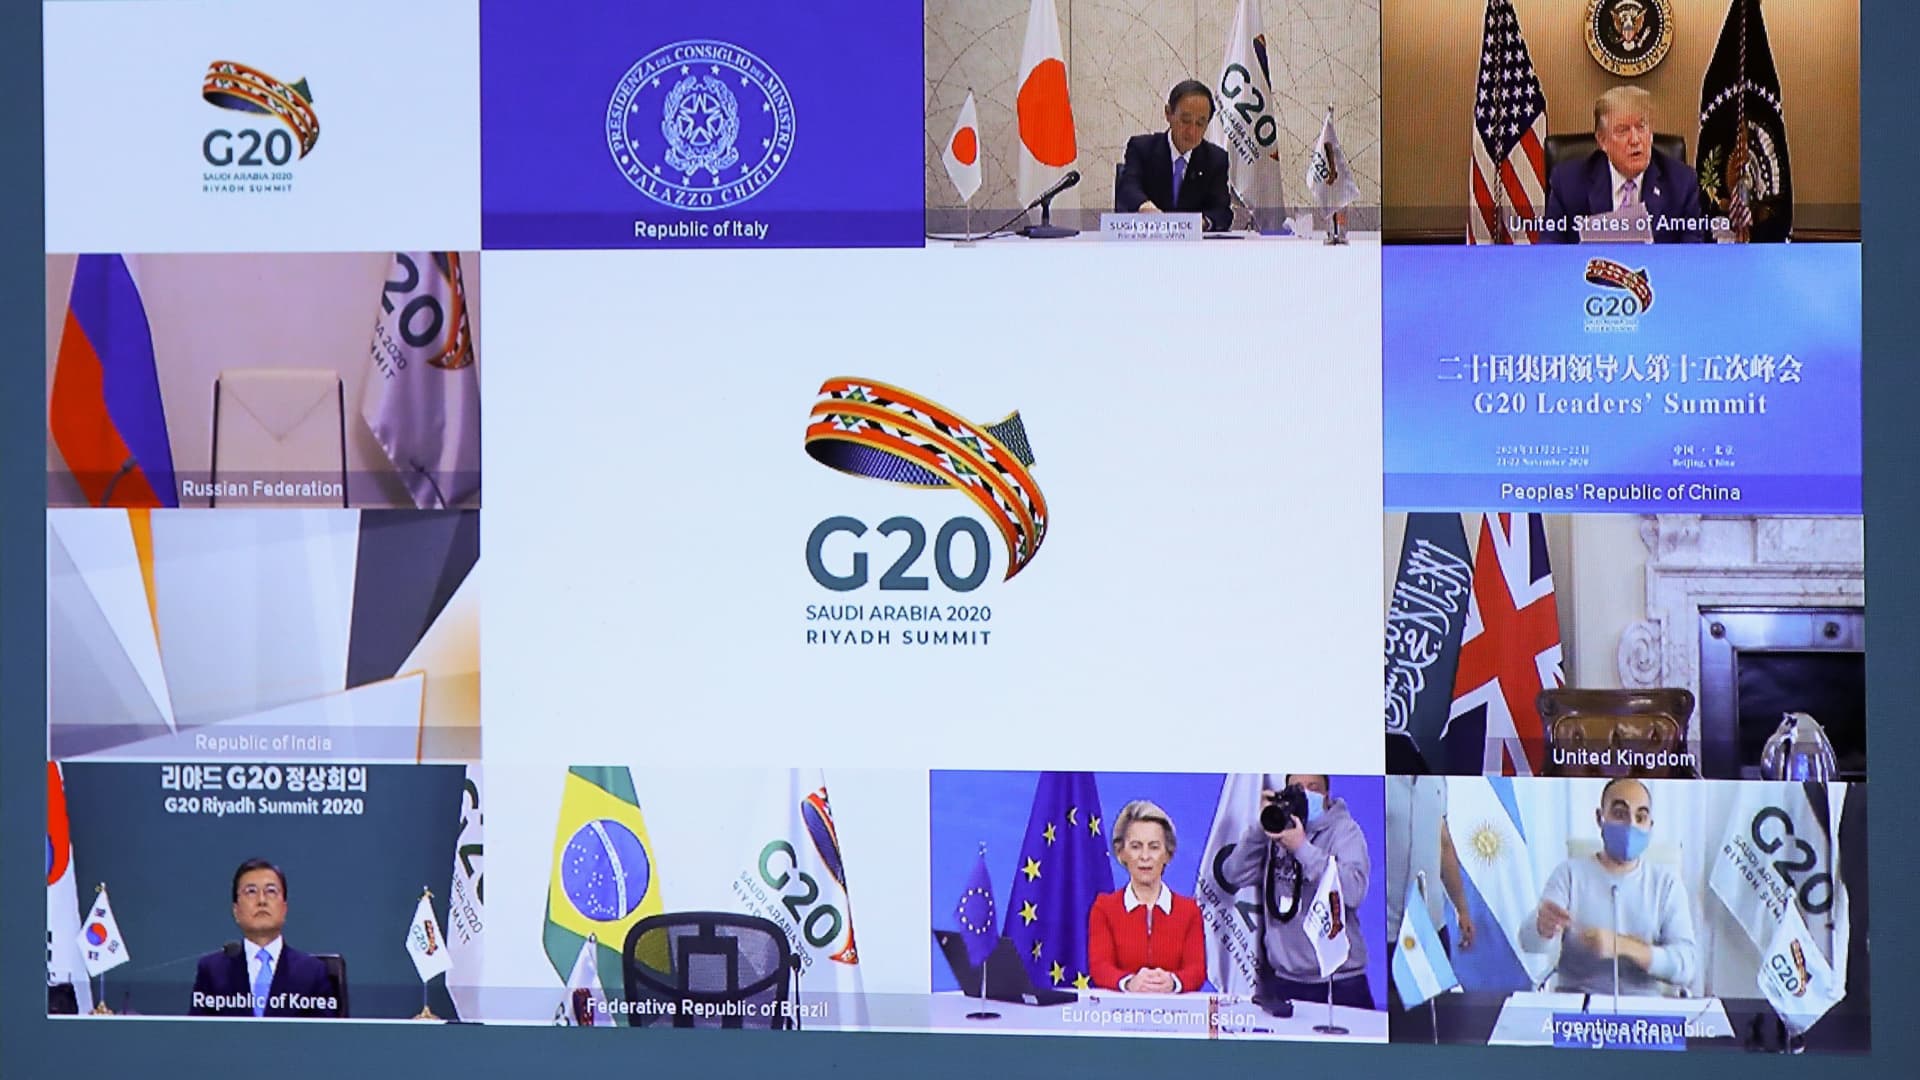 Japanese Prime Minister Yoshihide Suga (top L), US President Donald Trump (top R), South Korean President Moon Jae-in (down L), and European Commission President Ursula von der Leyen (down C) are seen on a screen before the start of a virtual G20 summit hosted by Saudi Arabia and held over video conference amid the Covid-19 (novel coronavirus) pandemic, in Brussels, on November 21, 2020.